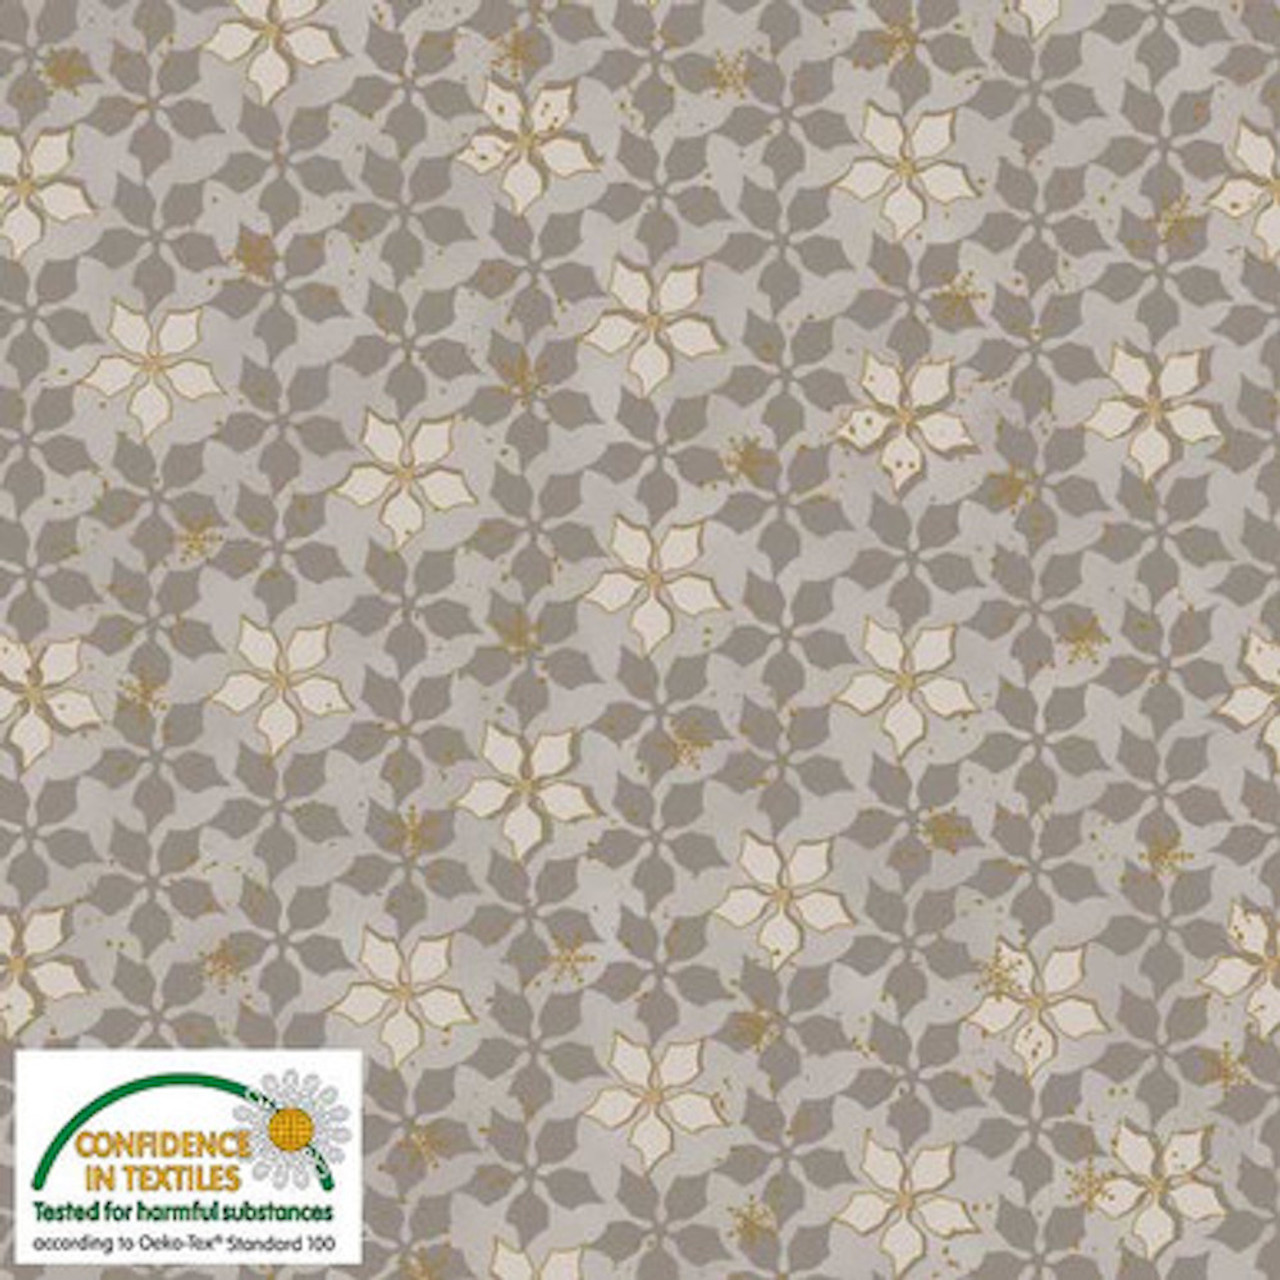 Stof Star Sprinkle Poinsettia Taupe Gold Cotton Fabric By The Yard